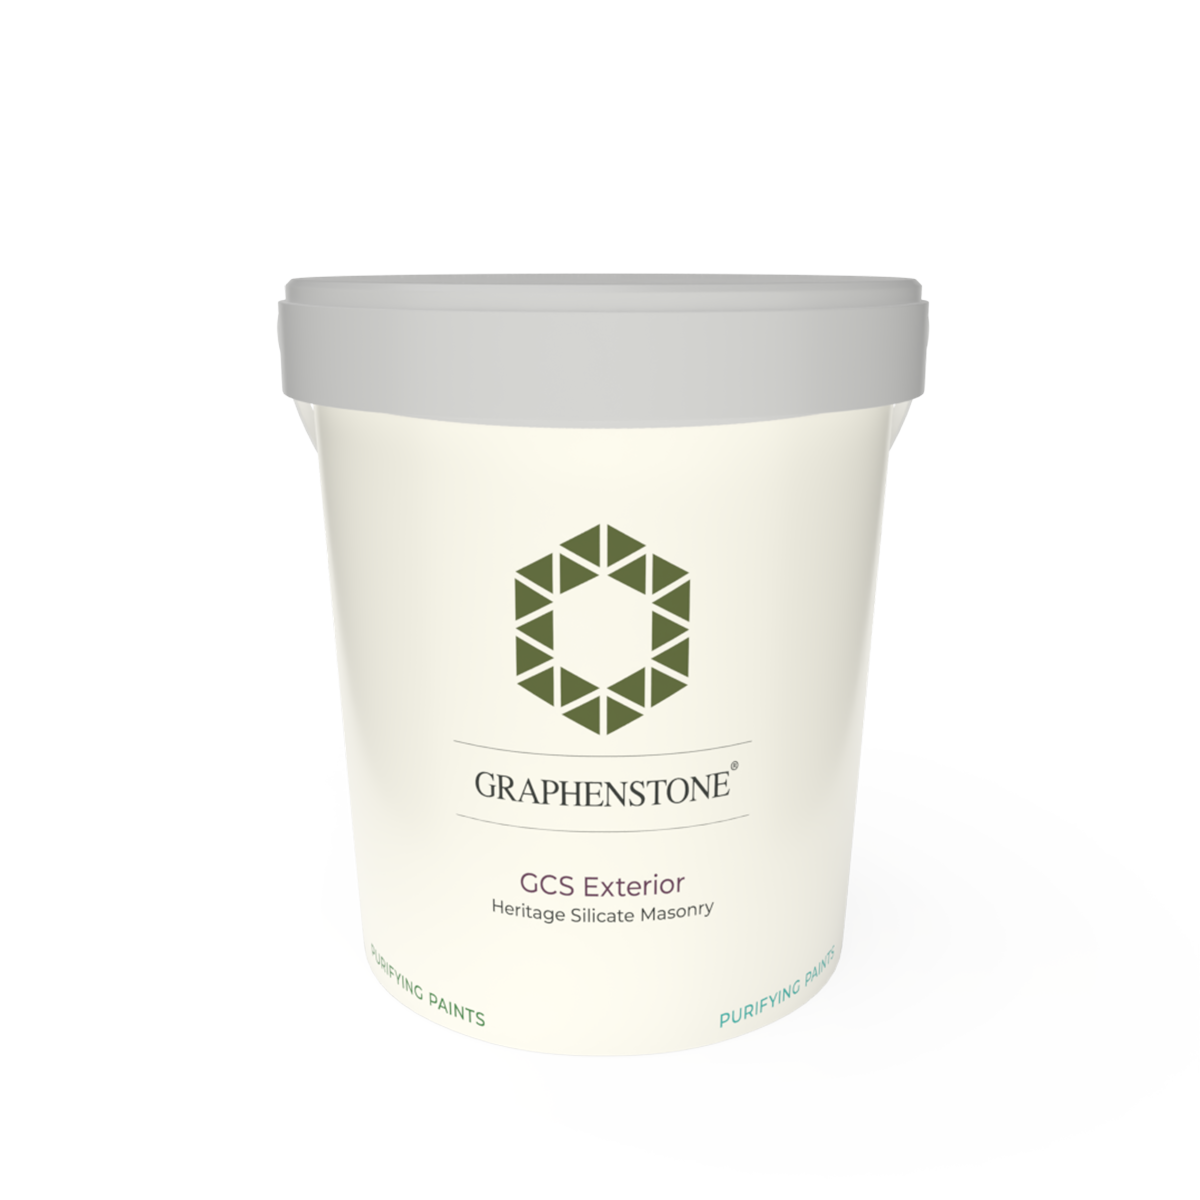 GCS Exterior White - natural lime masonry paint for heritage properties